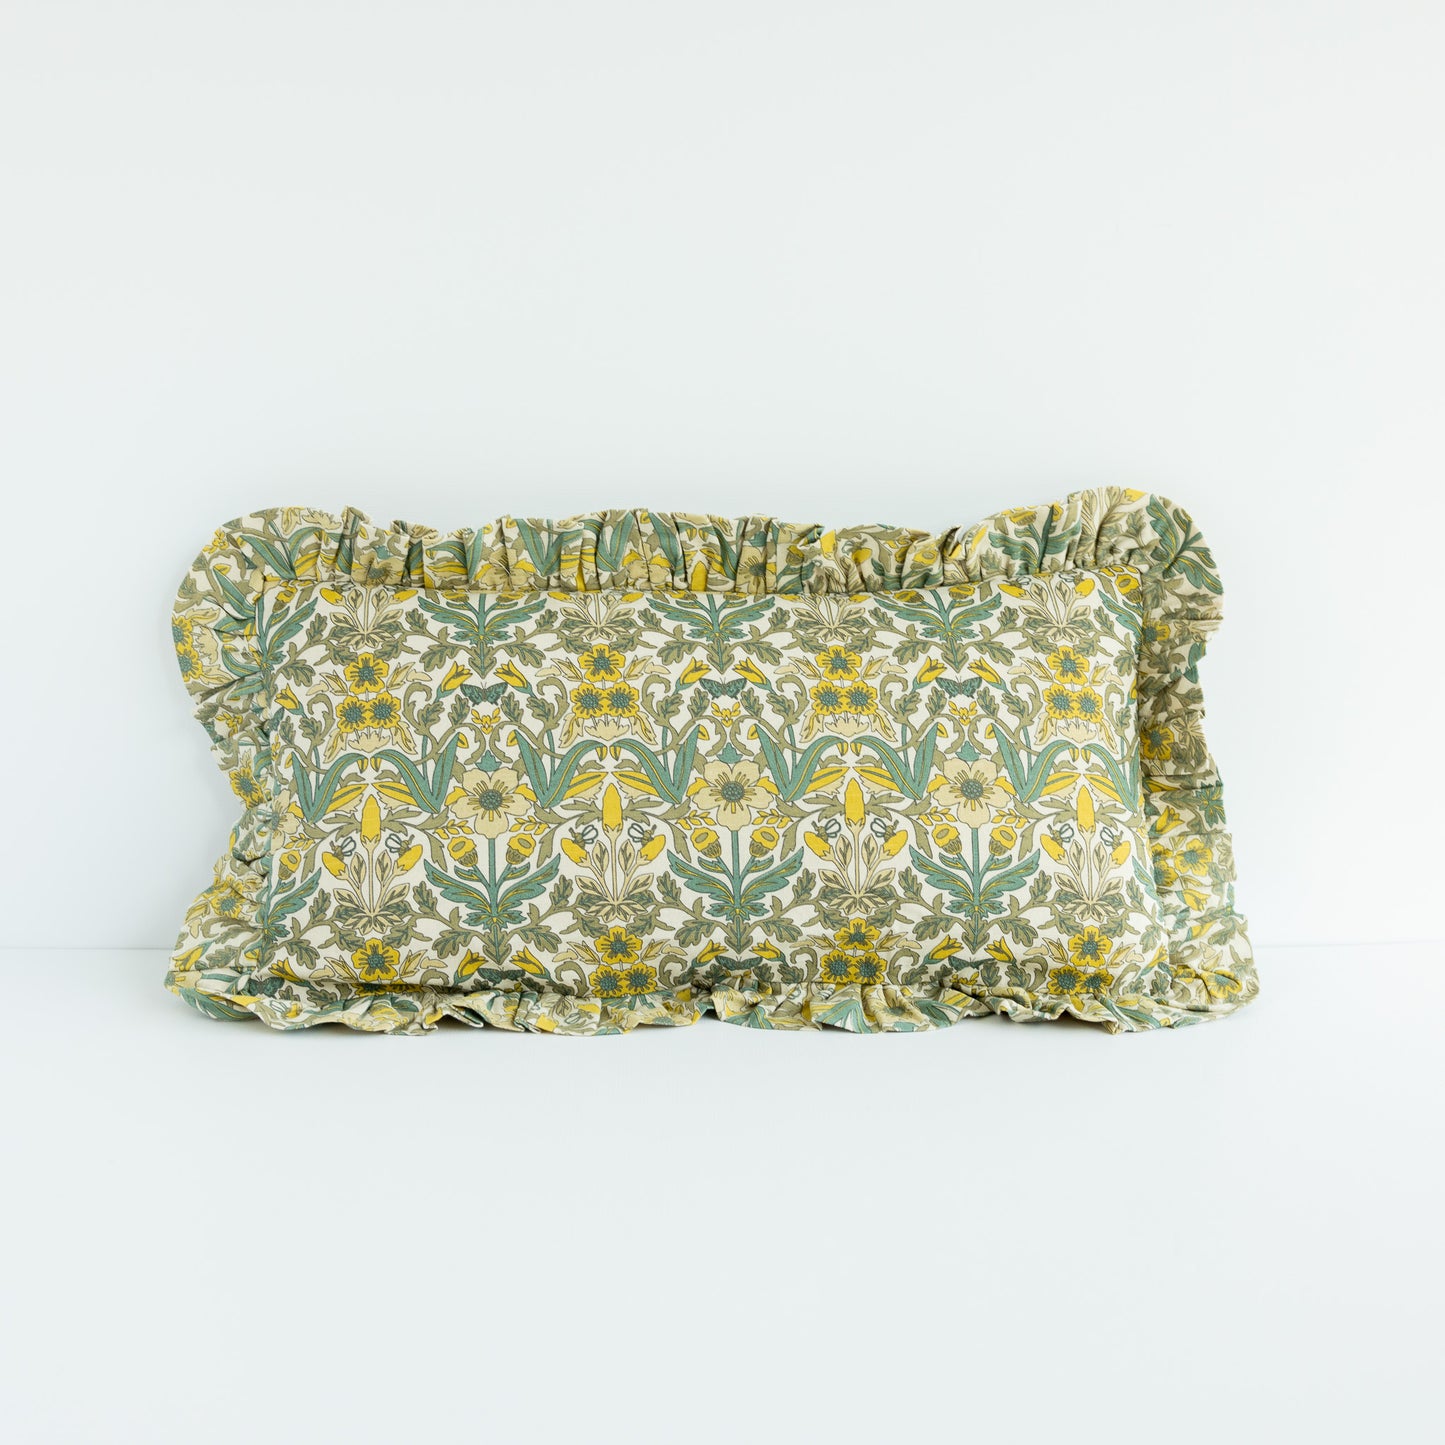 Ruffled Lumbar Pillow with Floral Pattern